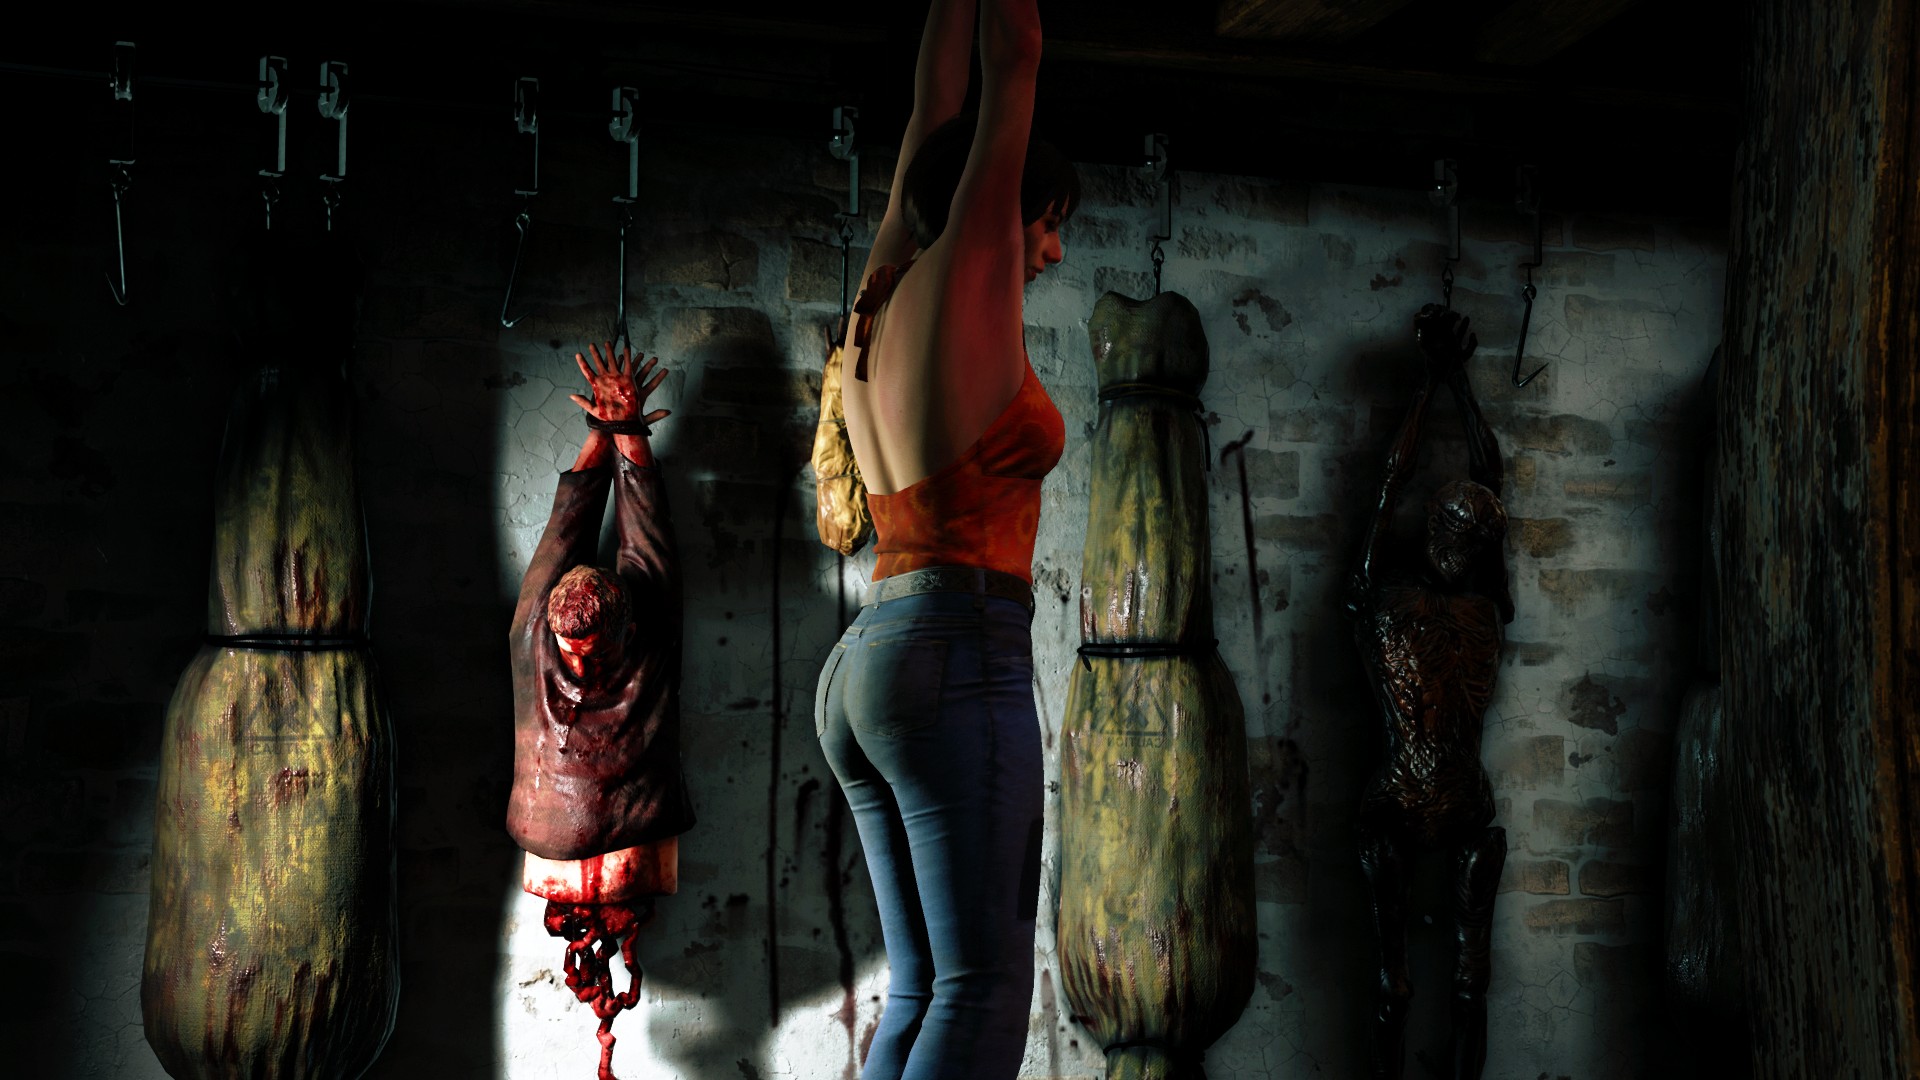 The Texas Chainsaw Massacre horror game is not Dead by Daylight: The victim of the Texas Chainsaw Massacre hangs in the basement.